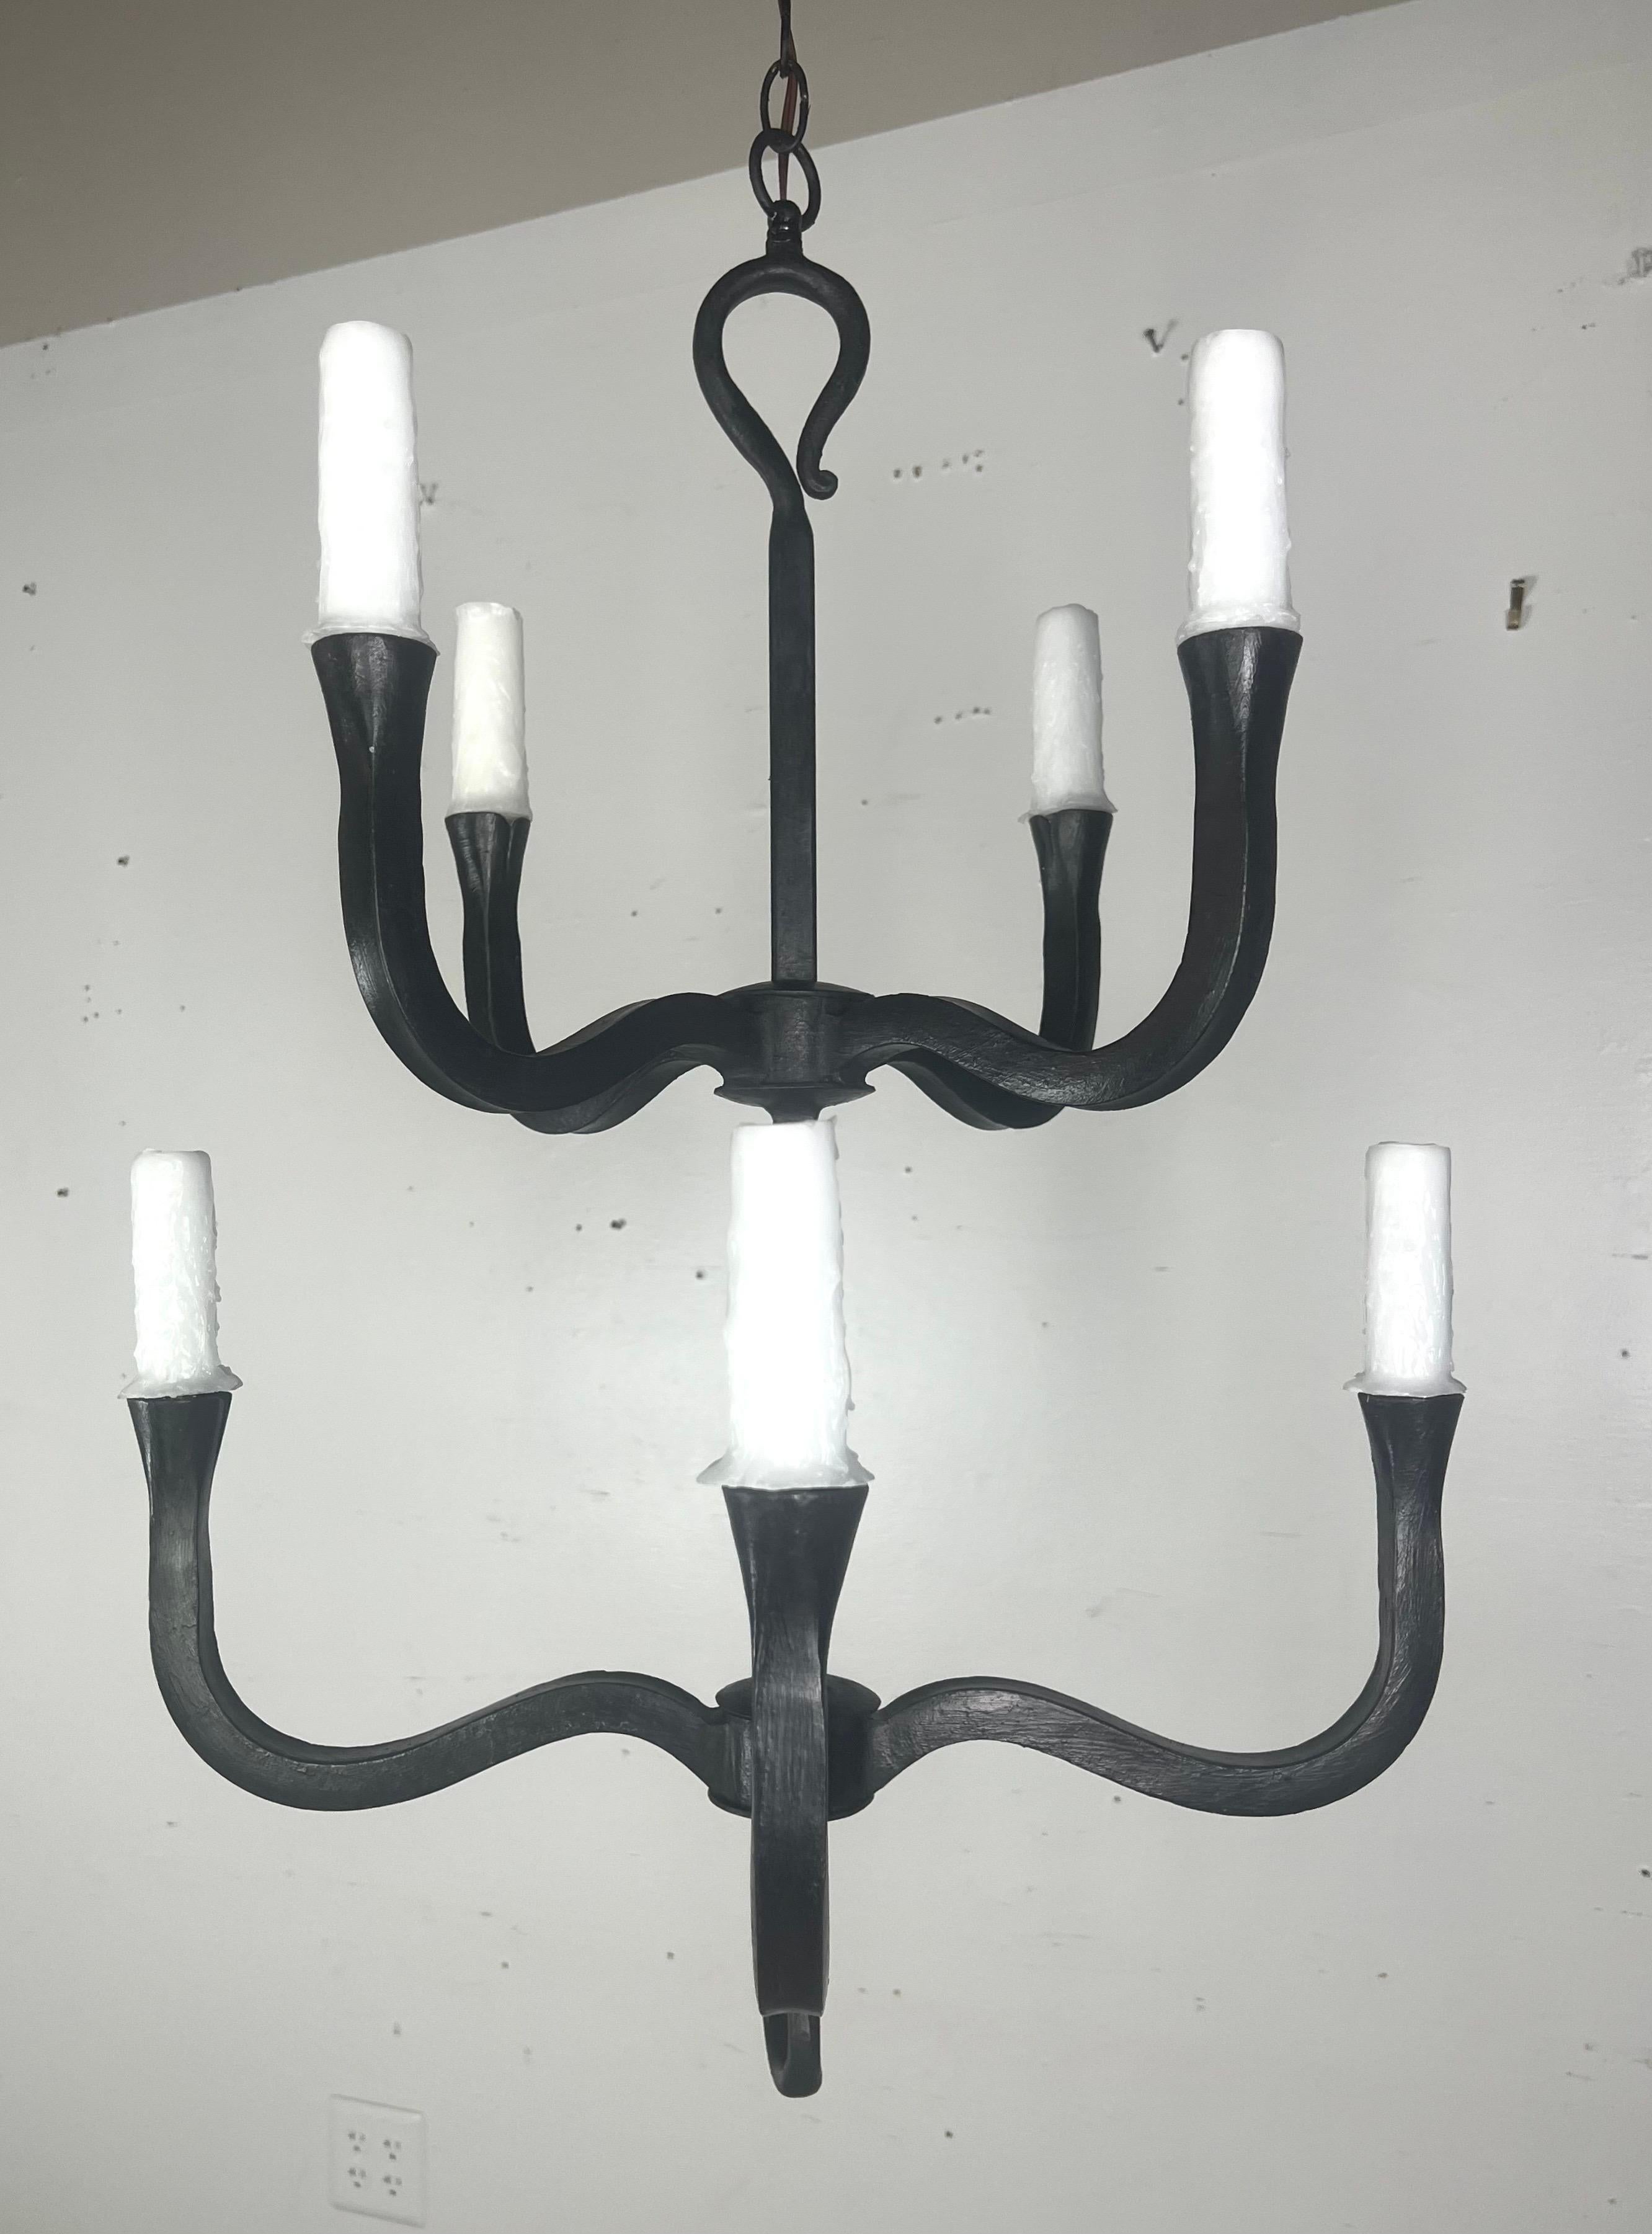 Custom two-tier wrought iron chandelier by Melissa Levinson.  This chandelier has a classic, elegant structure.   It has eight arms, each curving gracefully to hold a drip wax candle at the end.  The chandelier is wired and has chain and a